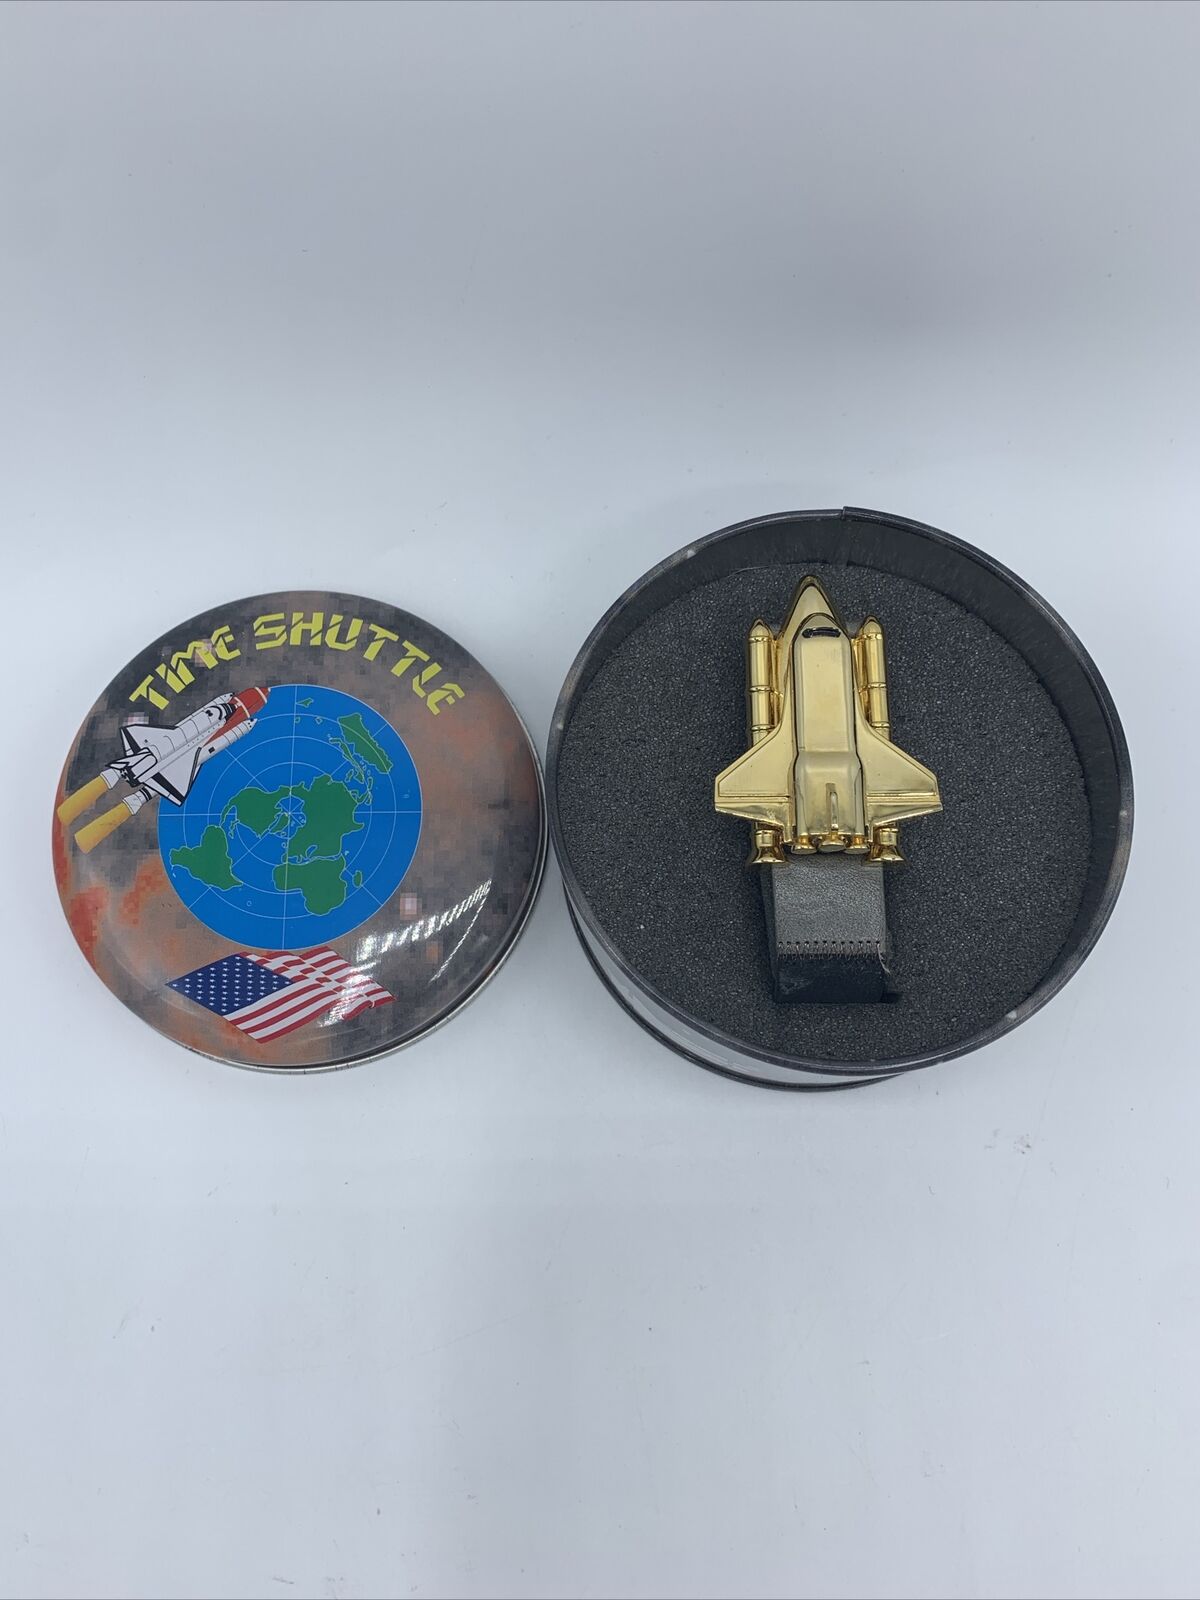 Vintage 1995 NASA TIME SHUTTLE  Space Shuttle Watch , Gold Color & Leather Belt